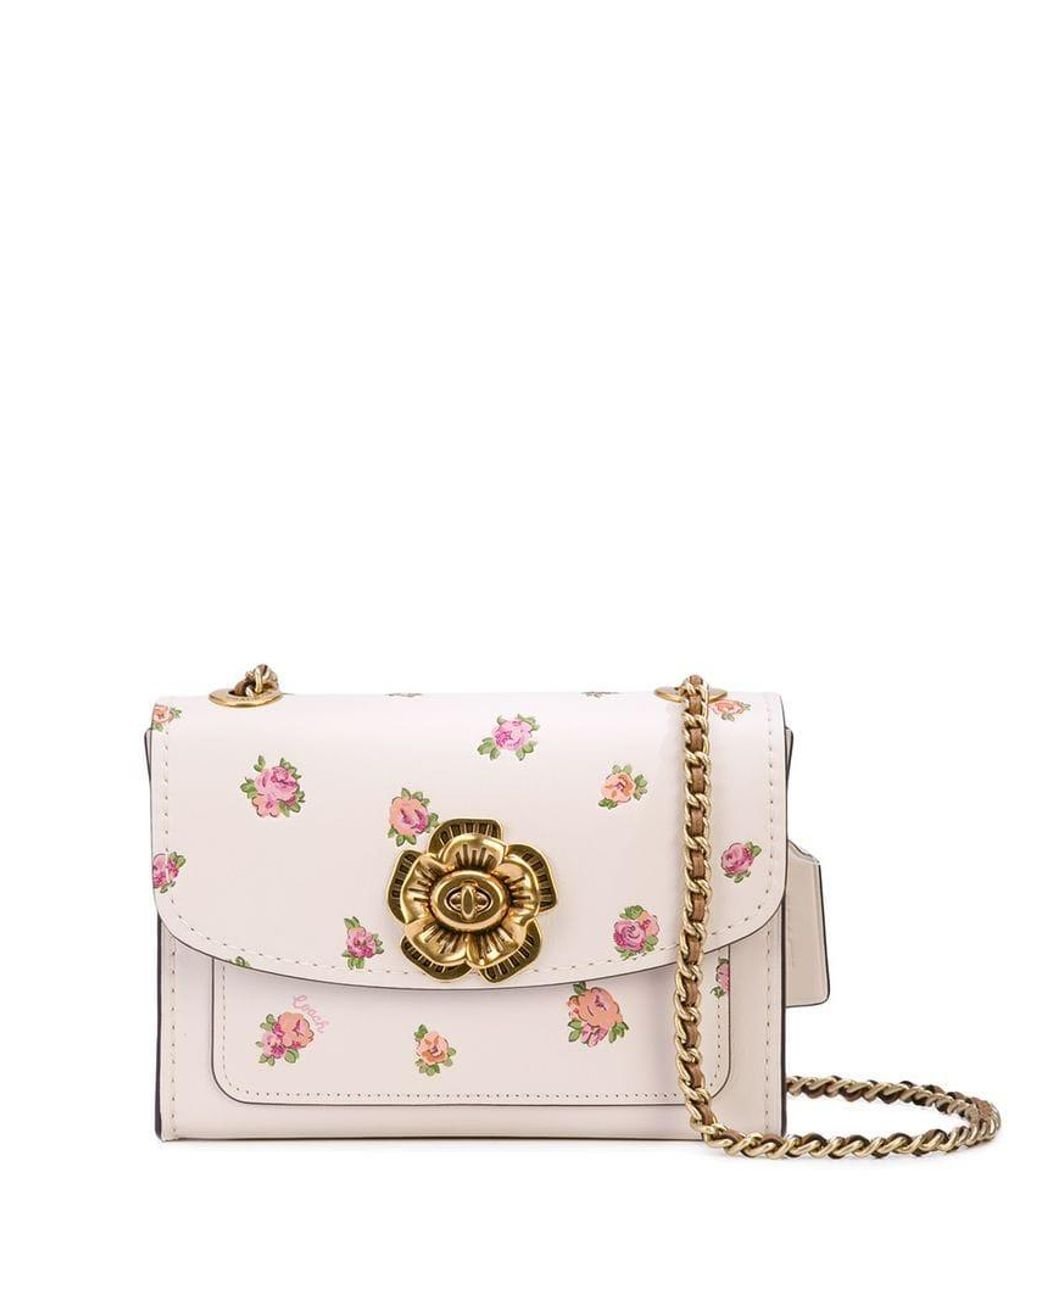 COACH Floral Print Crossbody Bag in White | Lyst